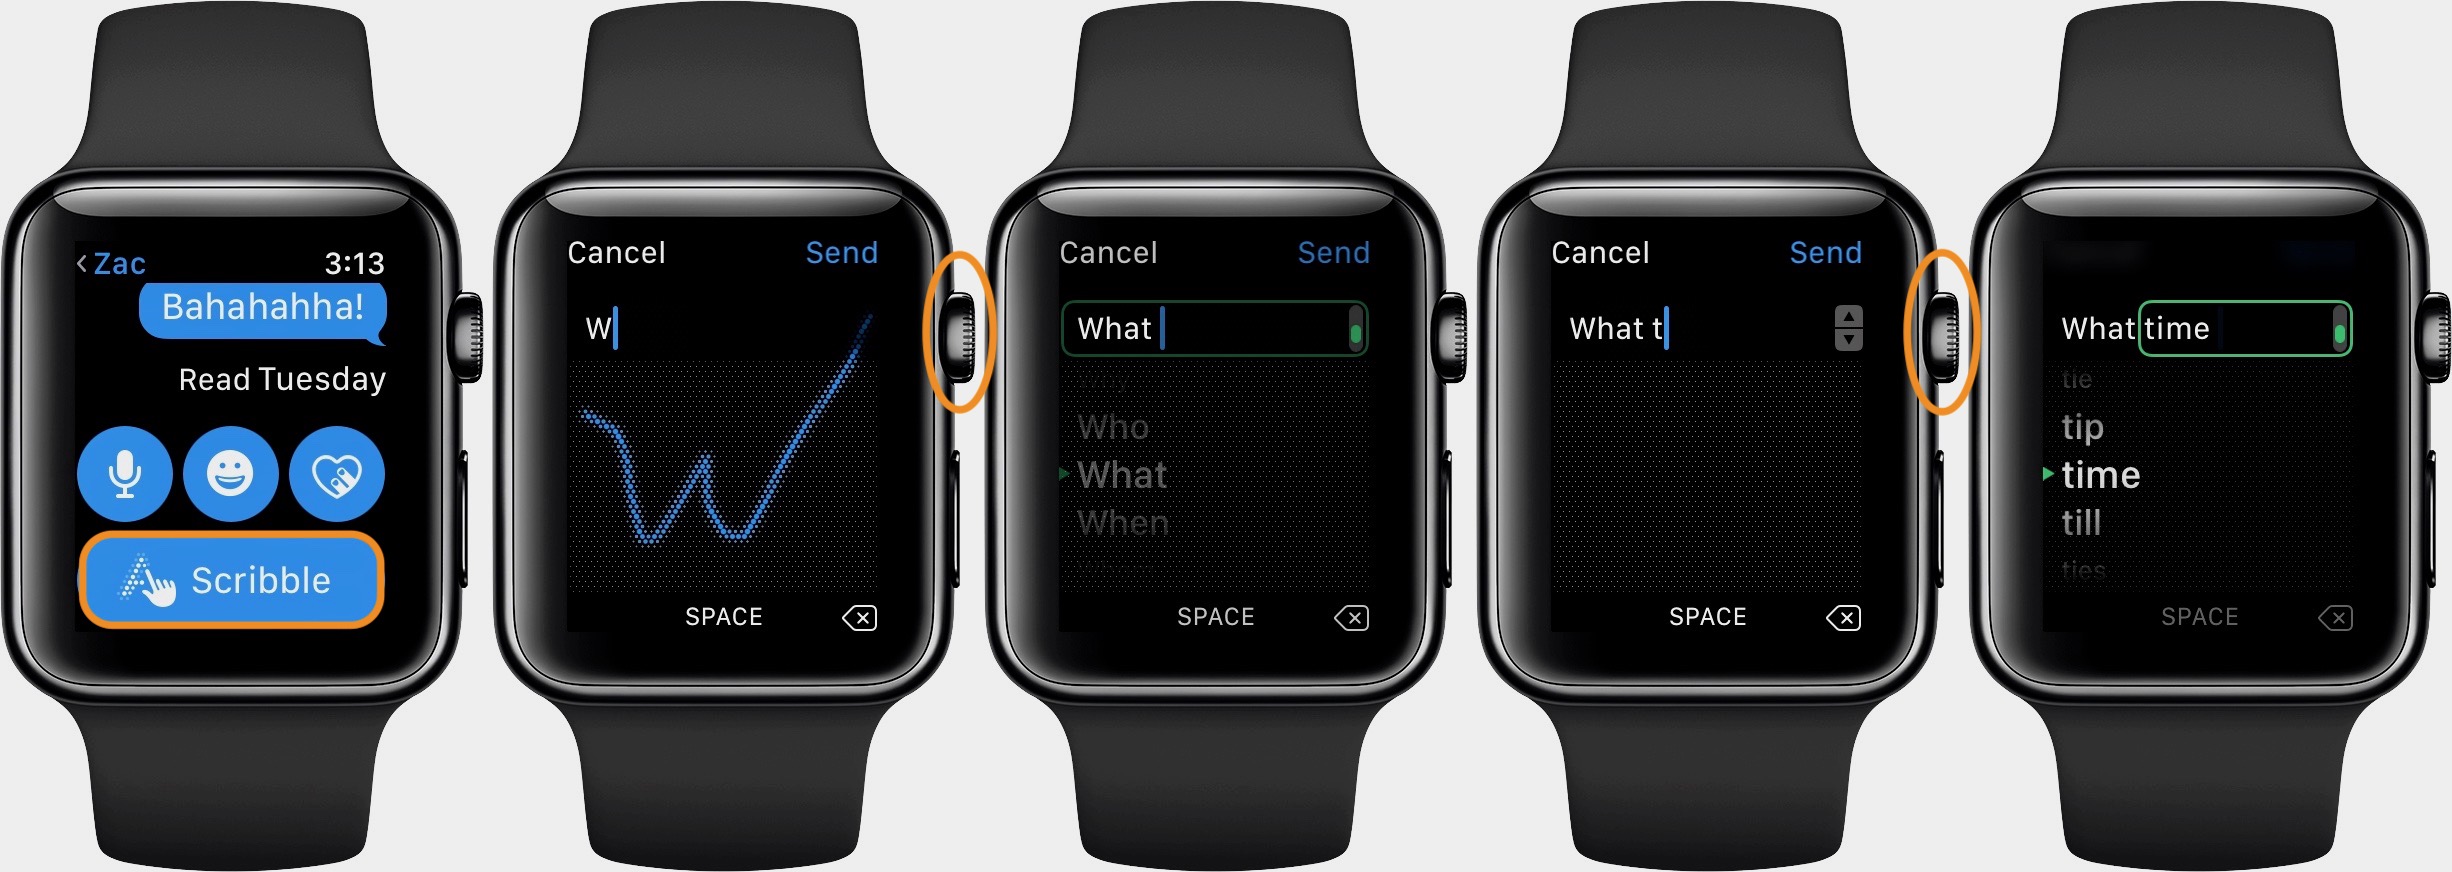 How to use Scribble on Apple Watch to text without voice - 24to24Mac